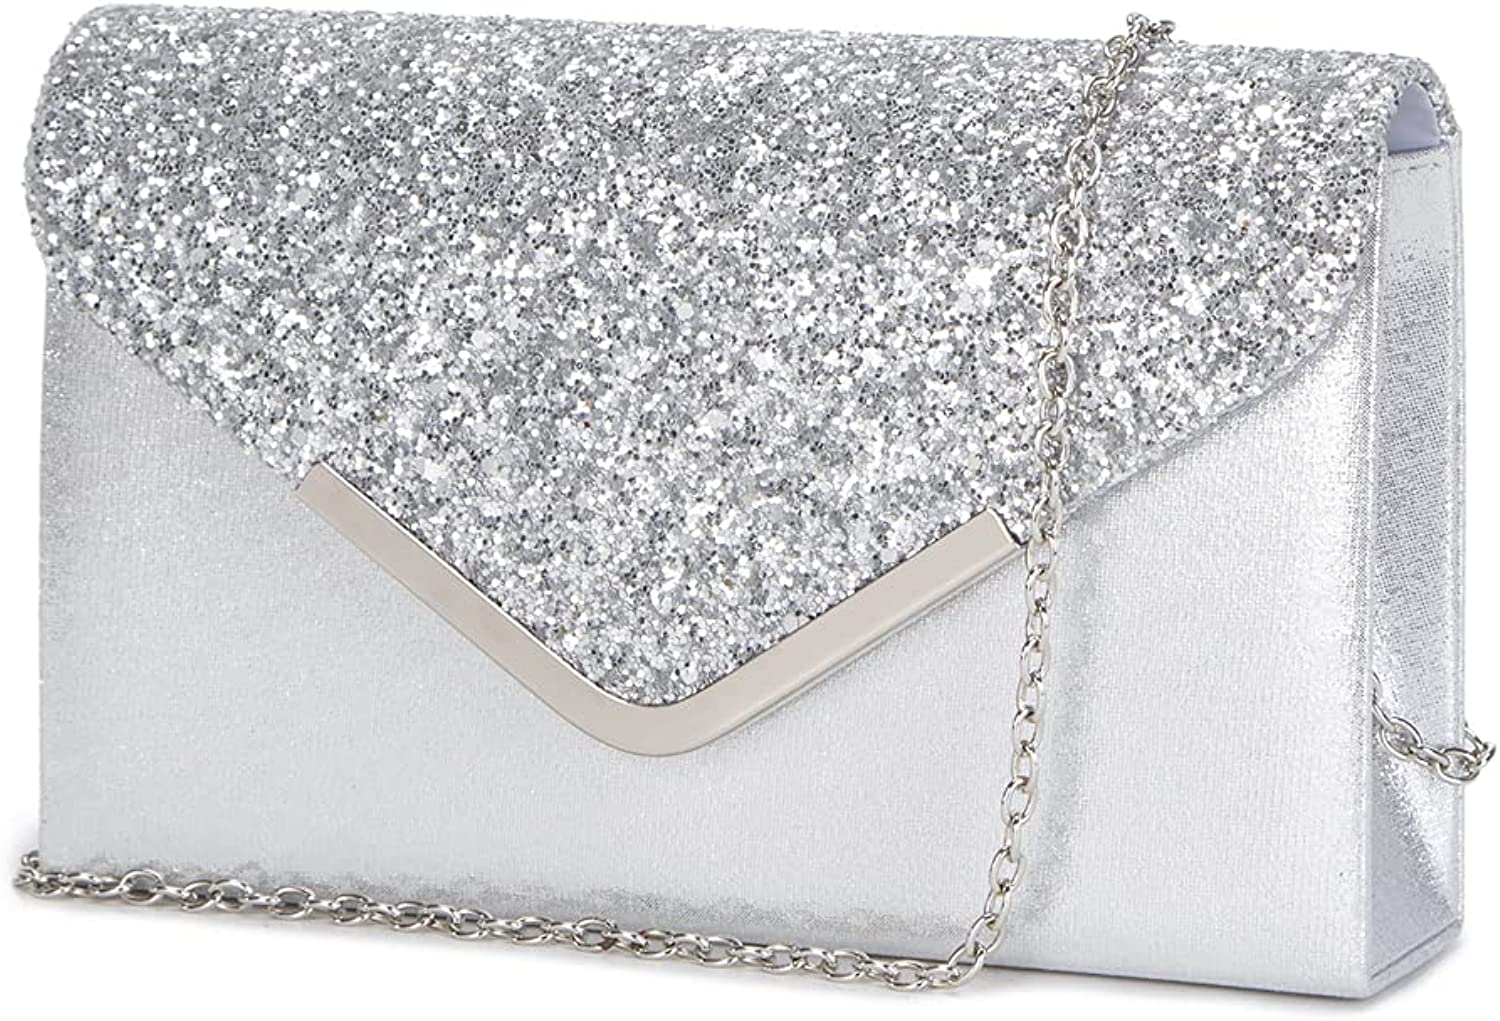 Lam Gallery Women's Evening Clutch Small Crossbody Purse for Prom Classic Wedding Party Shoulder Bags